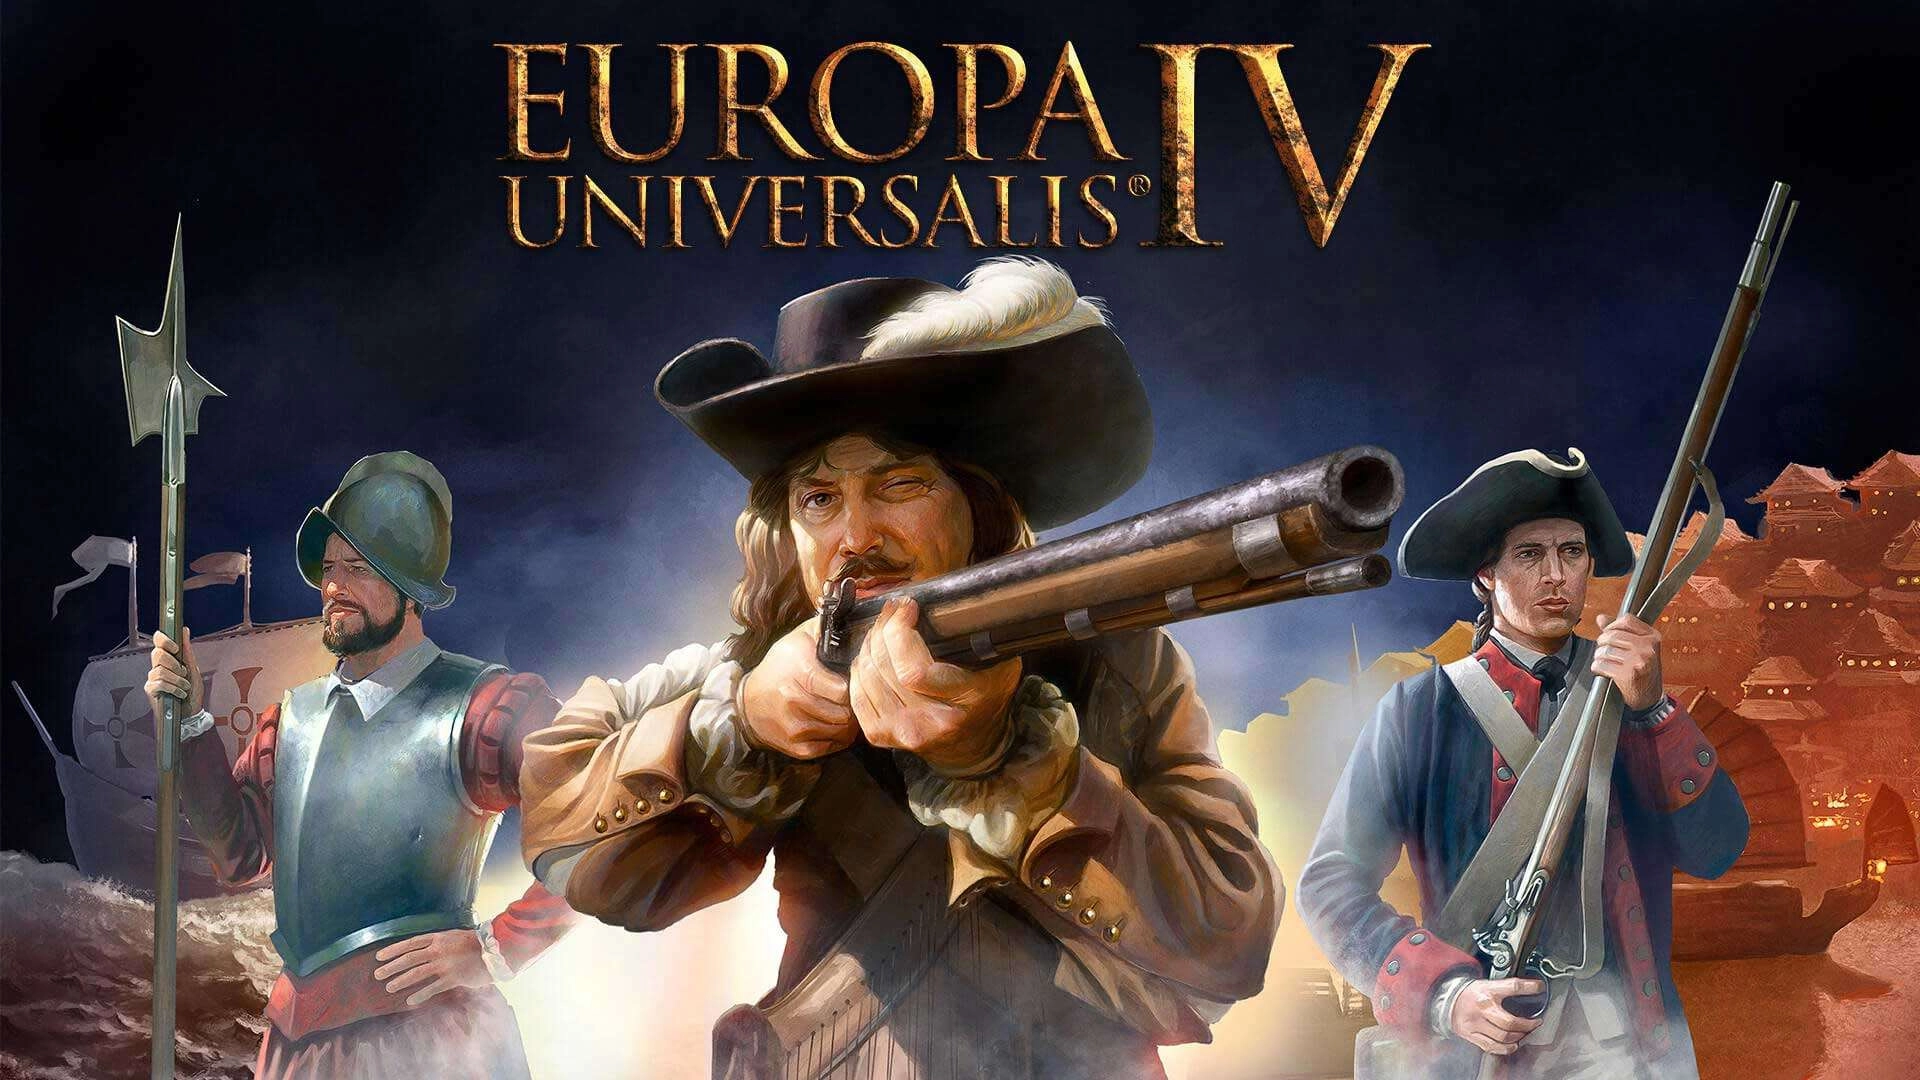 Europa Universalis IV is free at Epic Games Store